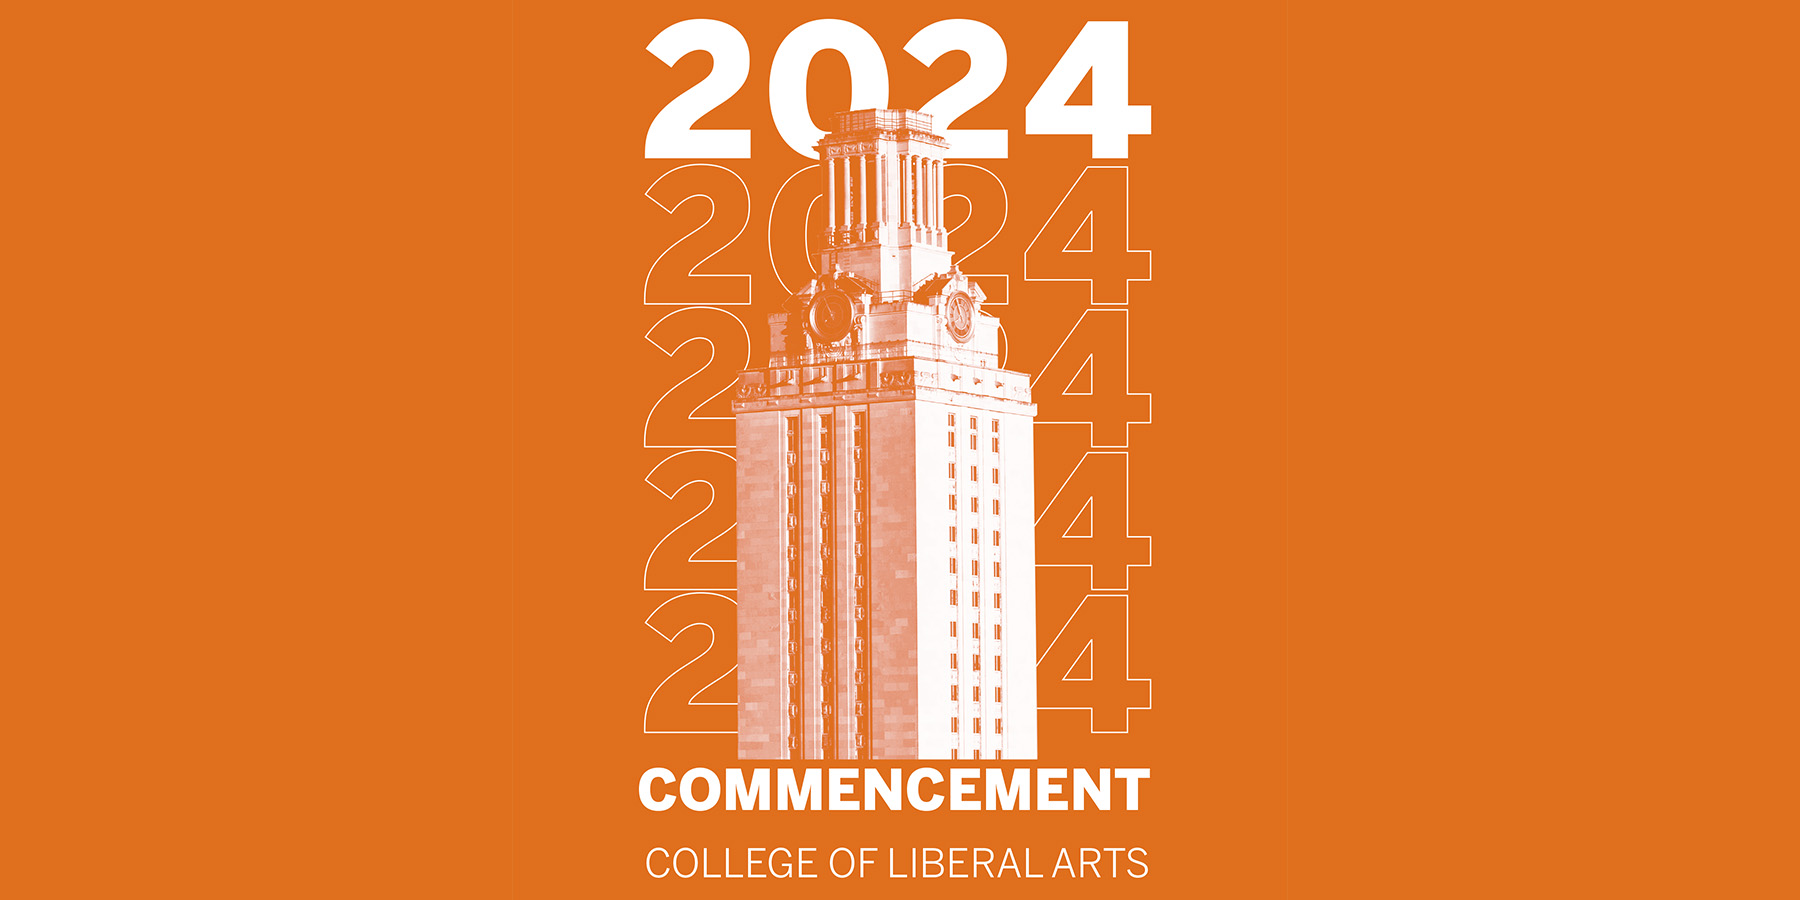 the UT tower with the words Commencement and College of Liberal Arts overlayed